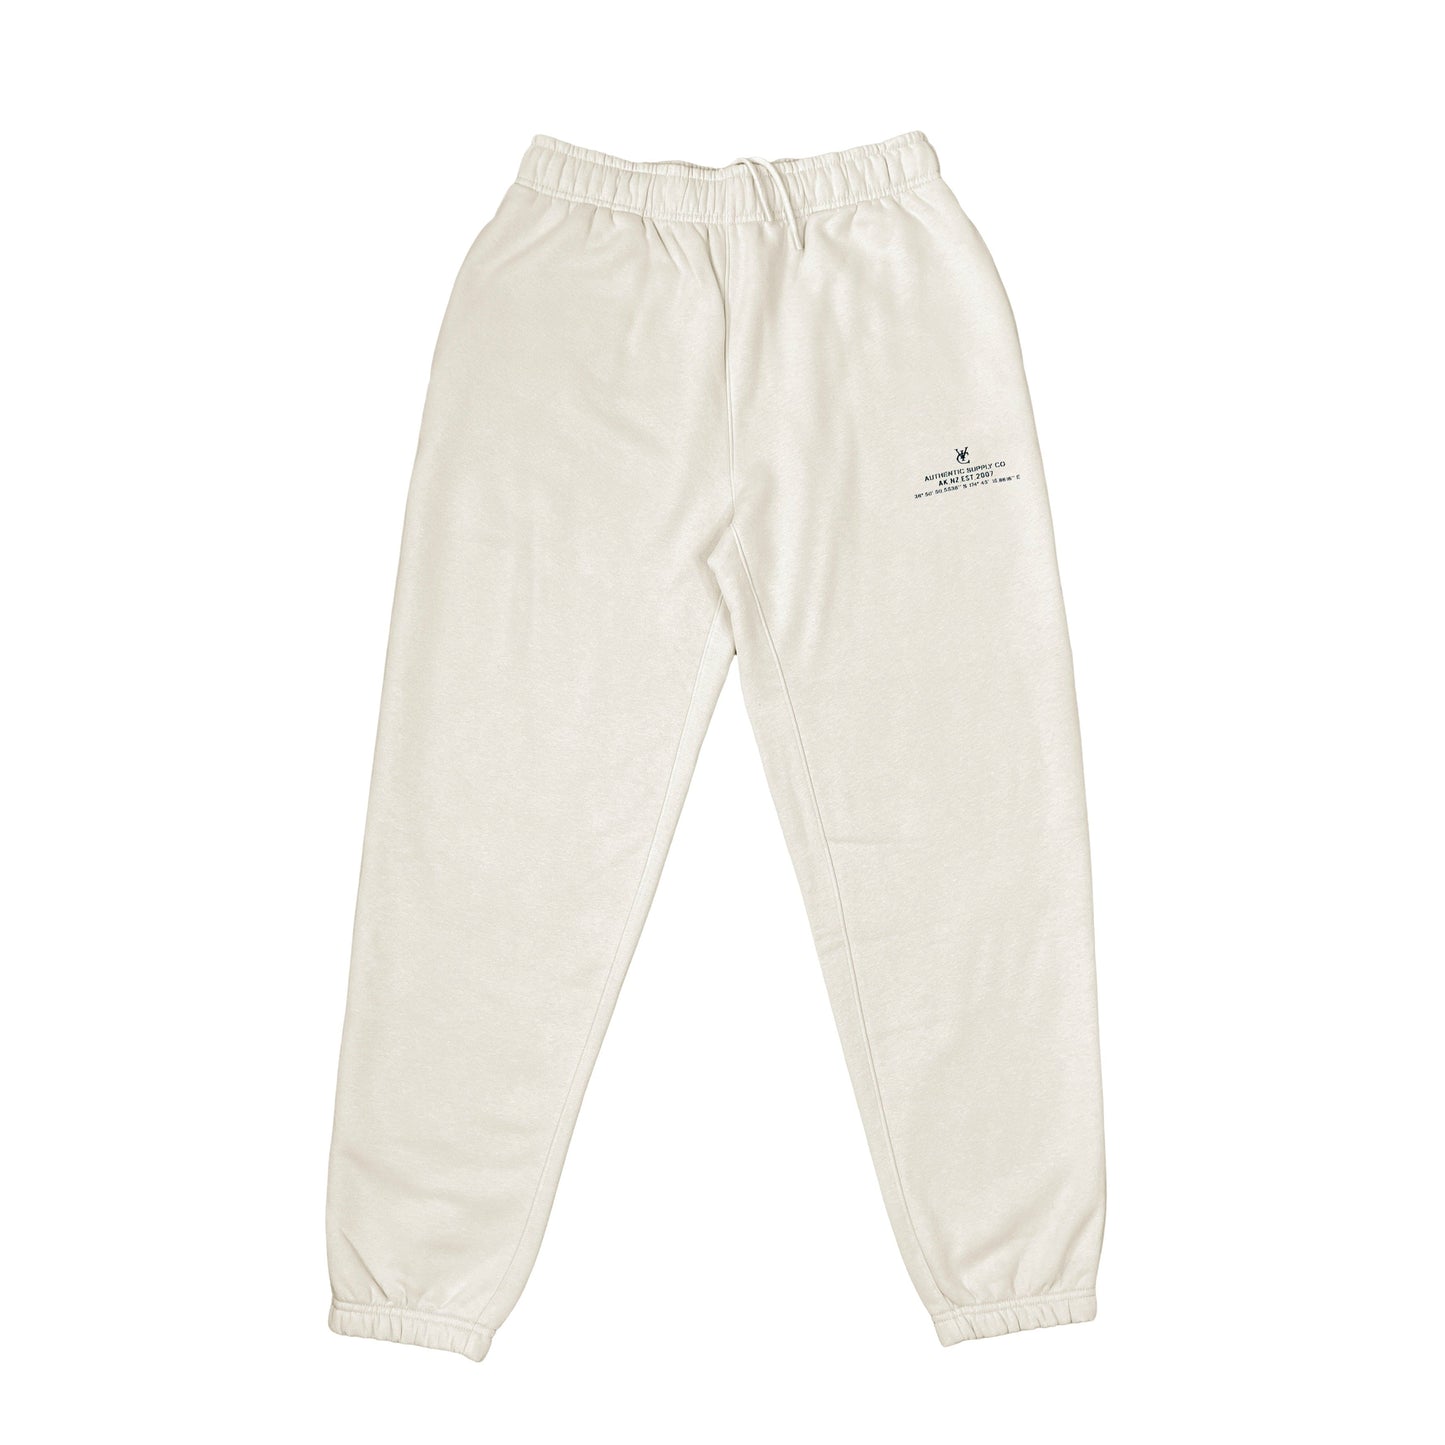 LATITUDE TRACK PANT - BUTTER